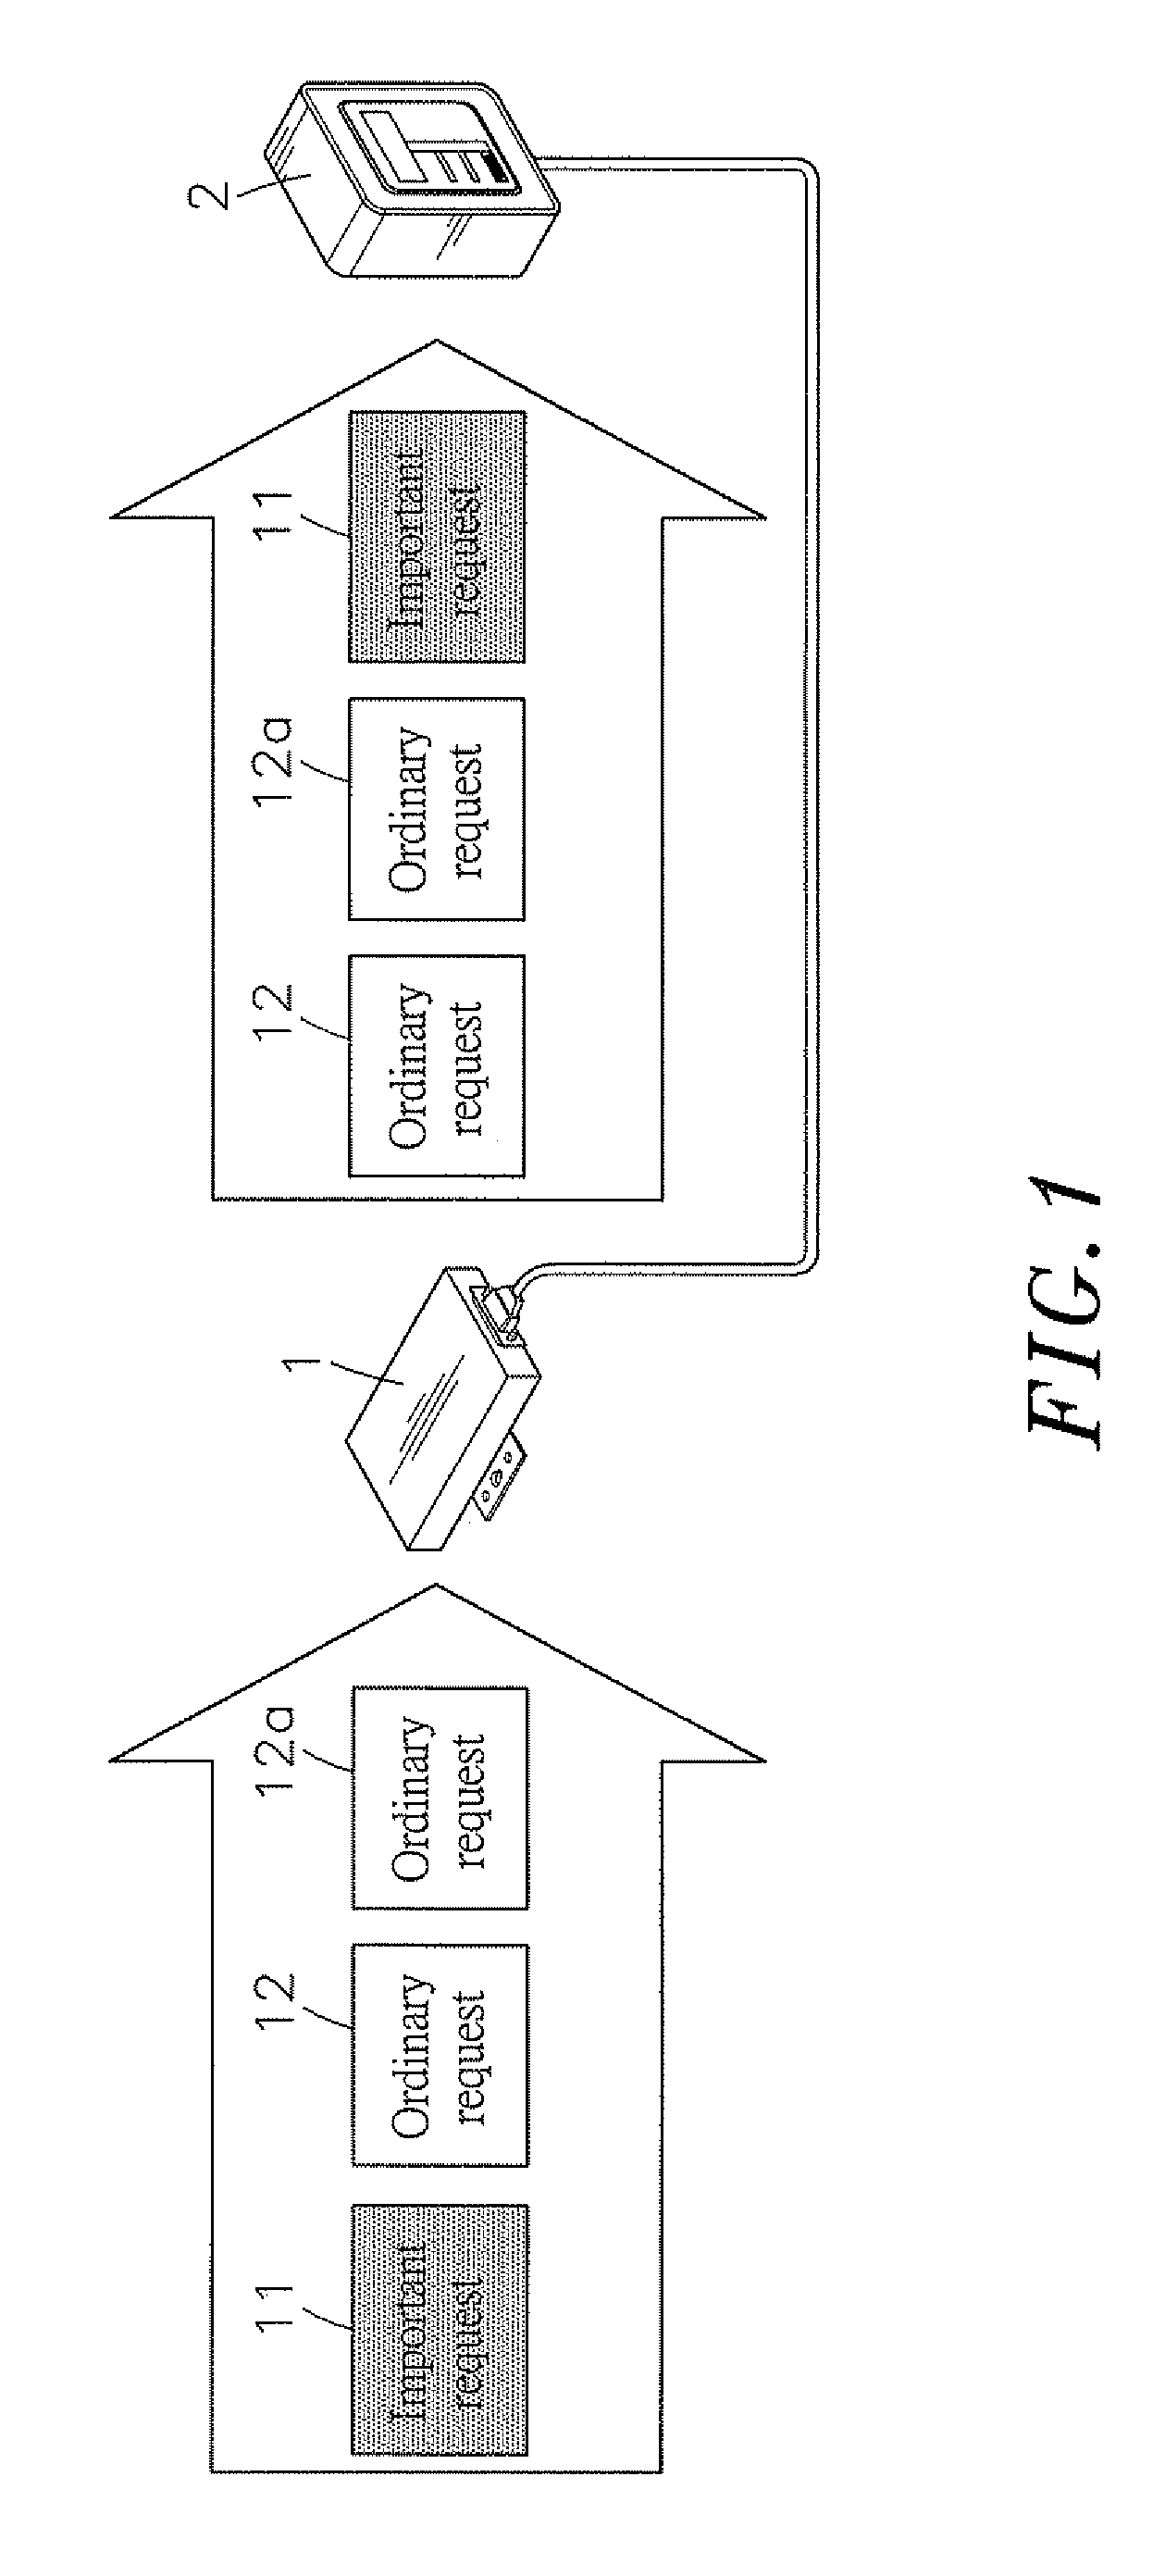 Method of determining request transmission priority subject to request content and transmitting request subject to such request transmission priority in application of fieldbus communication framework